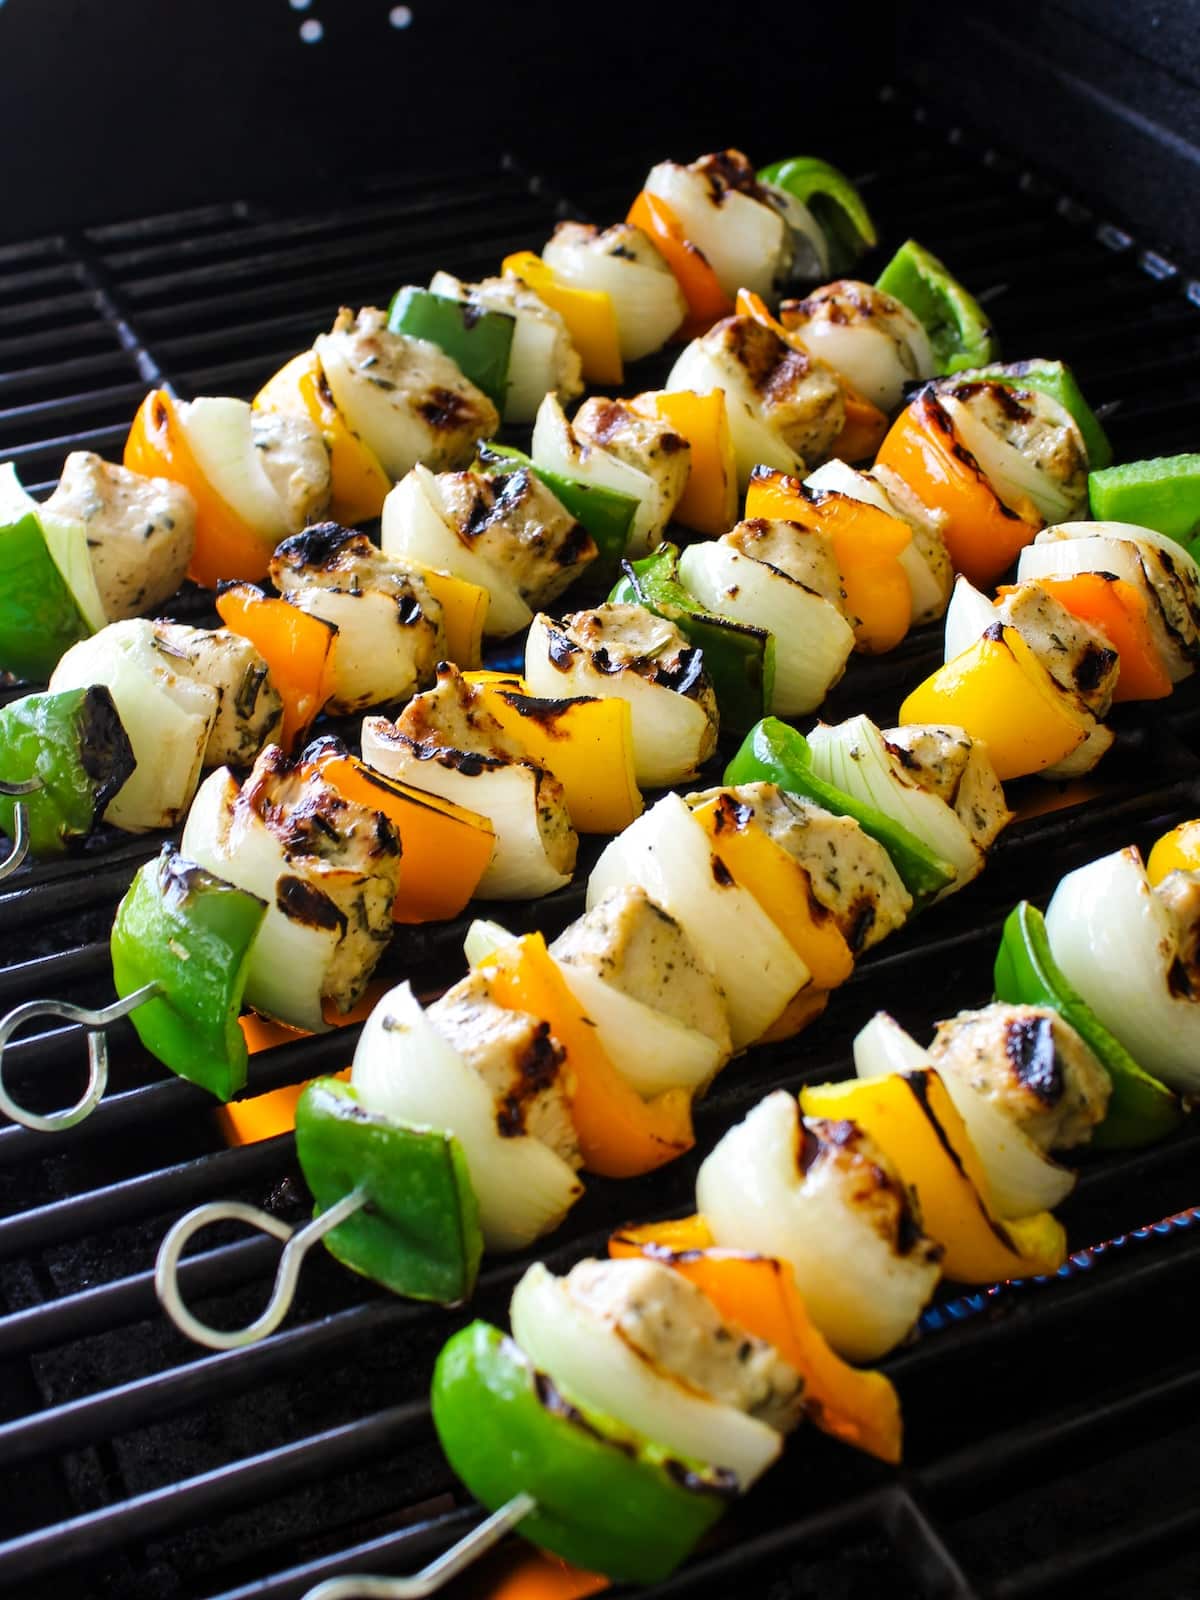 Chicken skewers being grilled for the chicken kabob recipe.